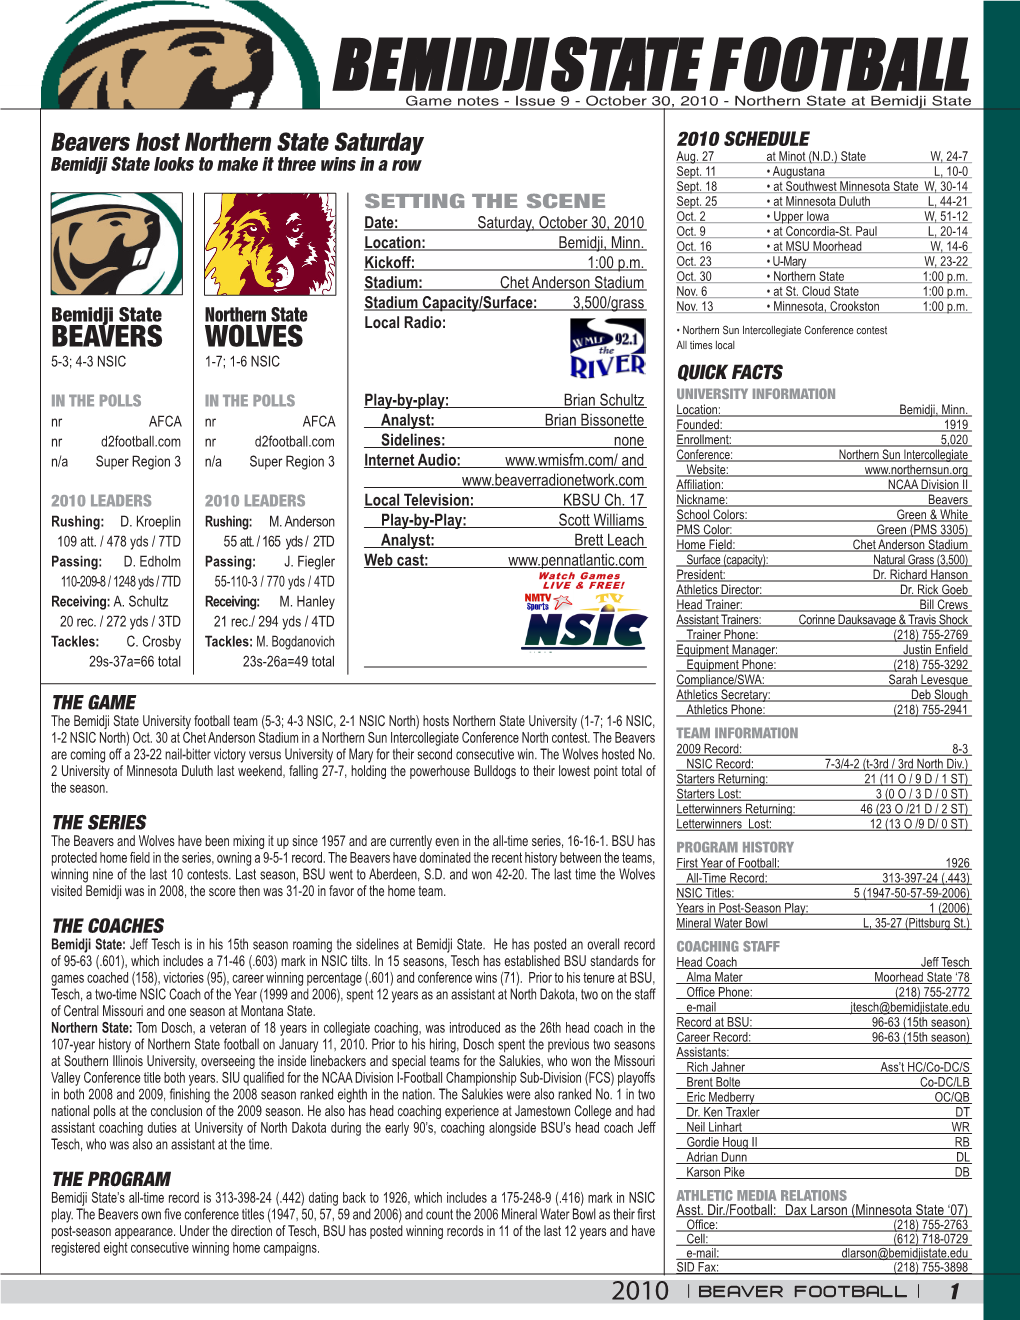 BEMIDJI STATE FOOTBALL Game Notes - Issue 9 - October 30, 2010 - Northern State at Bemidji State Beavers Host Northern State Saturday 2010 SCHEDULE Aug